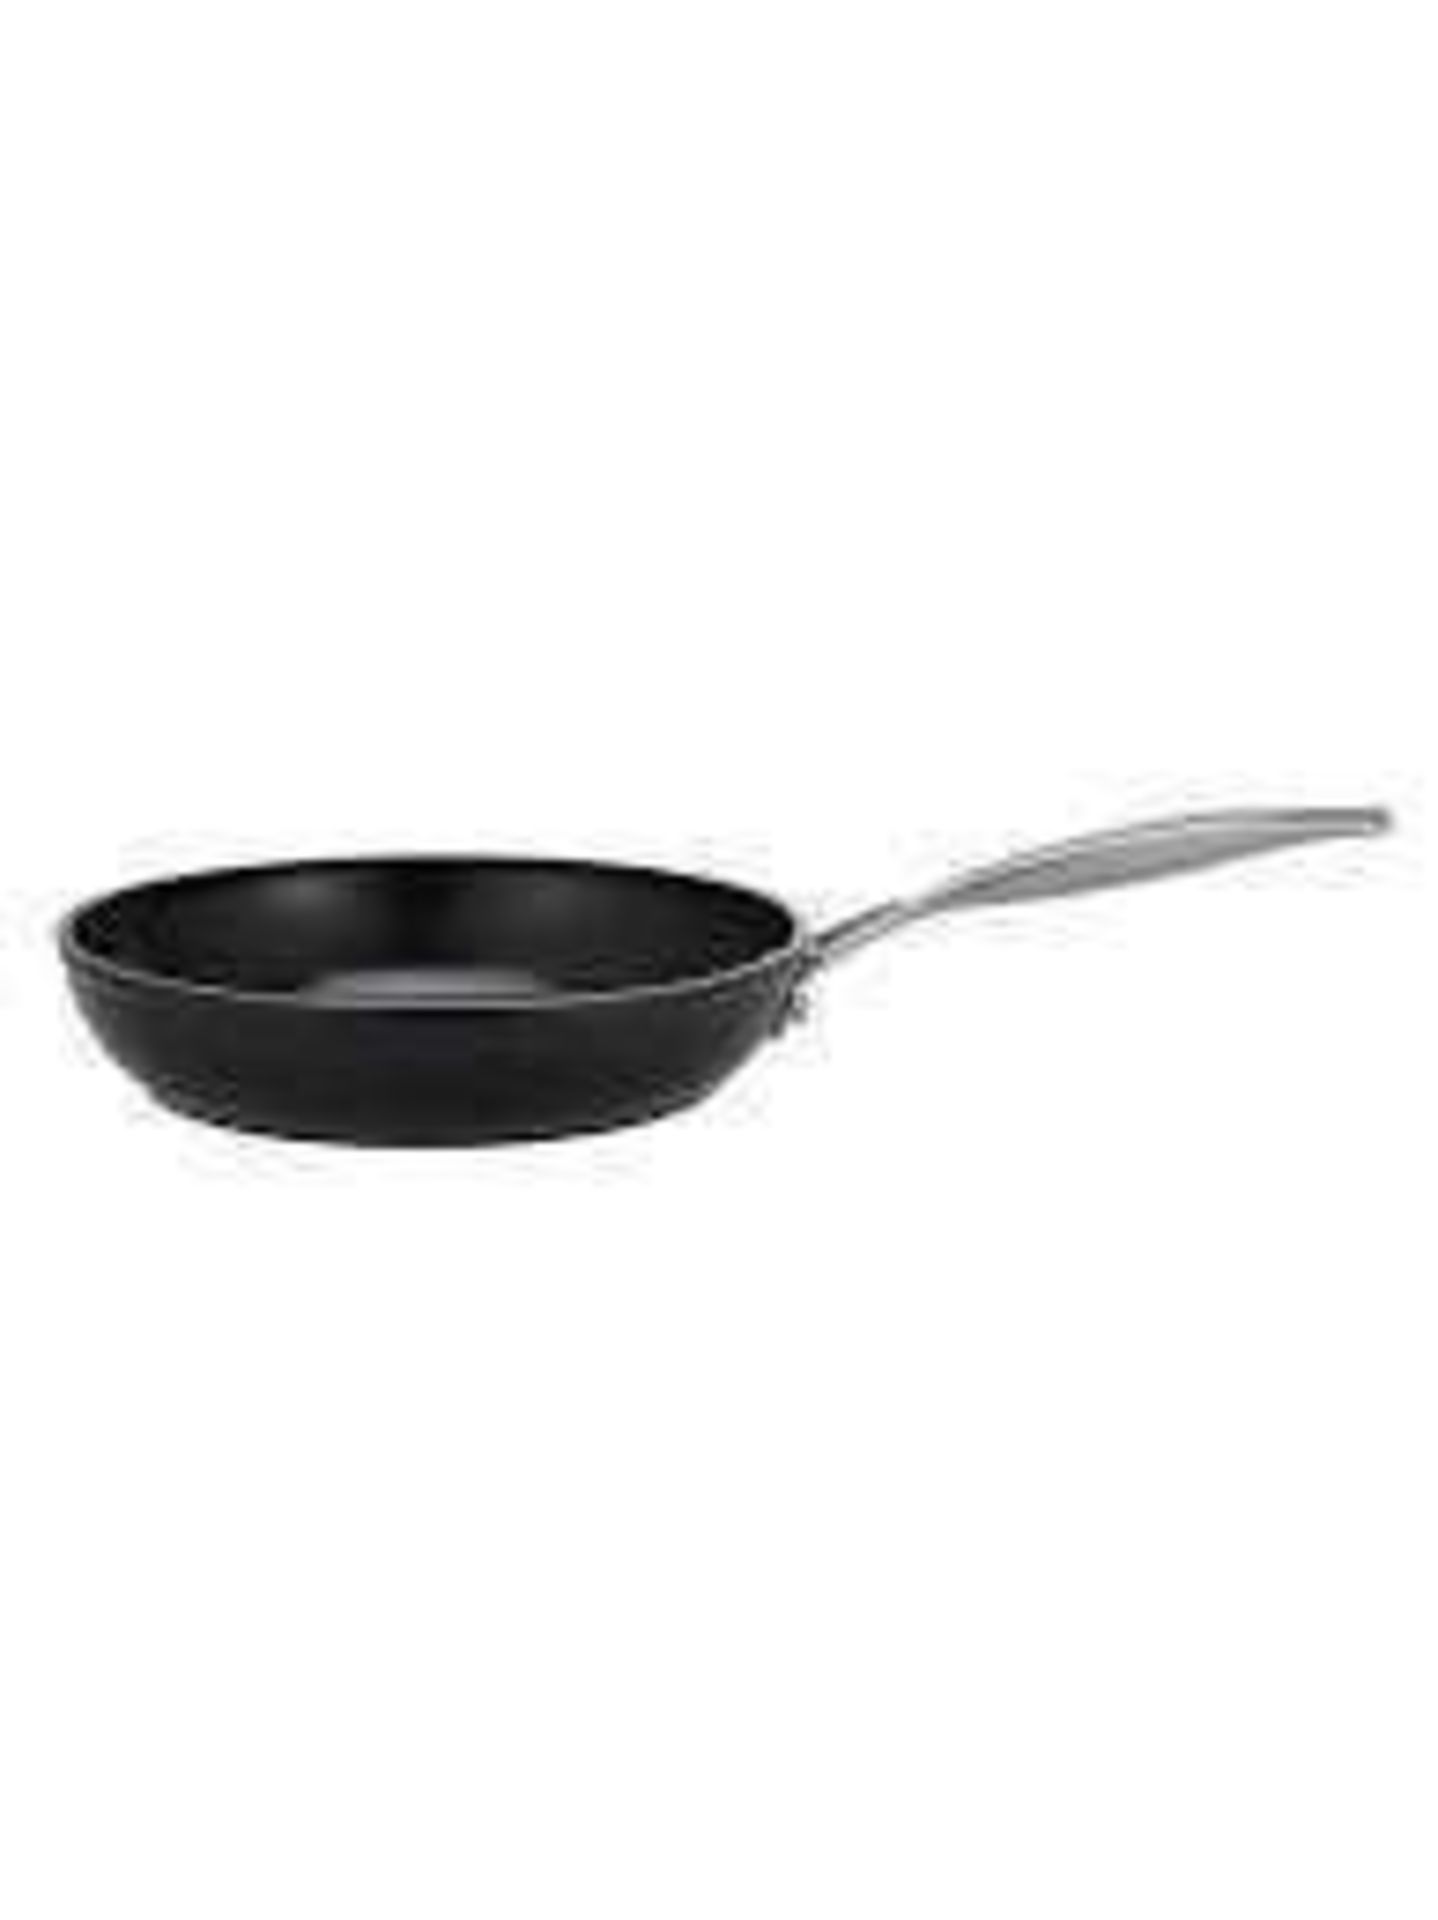 RRP £175 Lot To Contain 3 Kitchen Ware Items Including 1 Frying Pan 1 Wok And 1 Deep Pot Pan